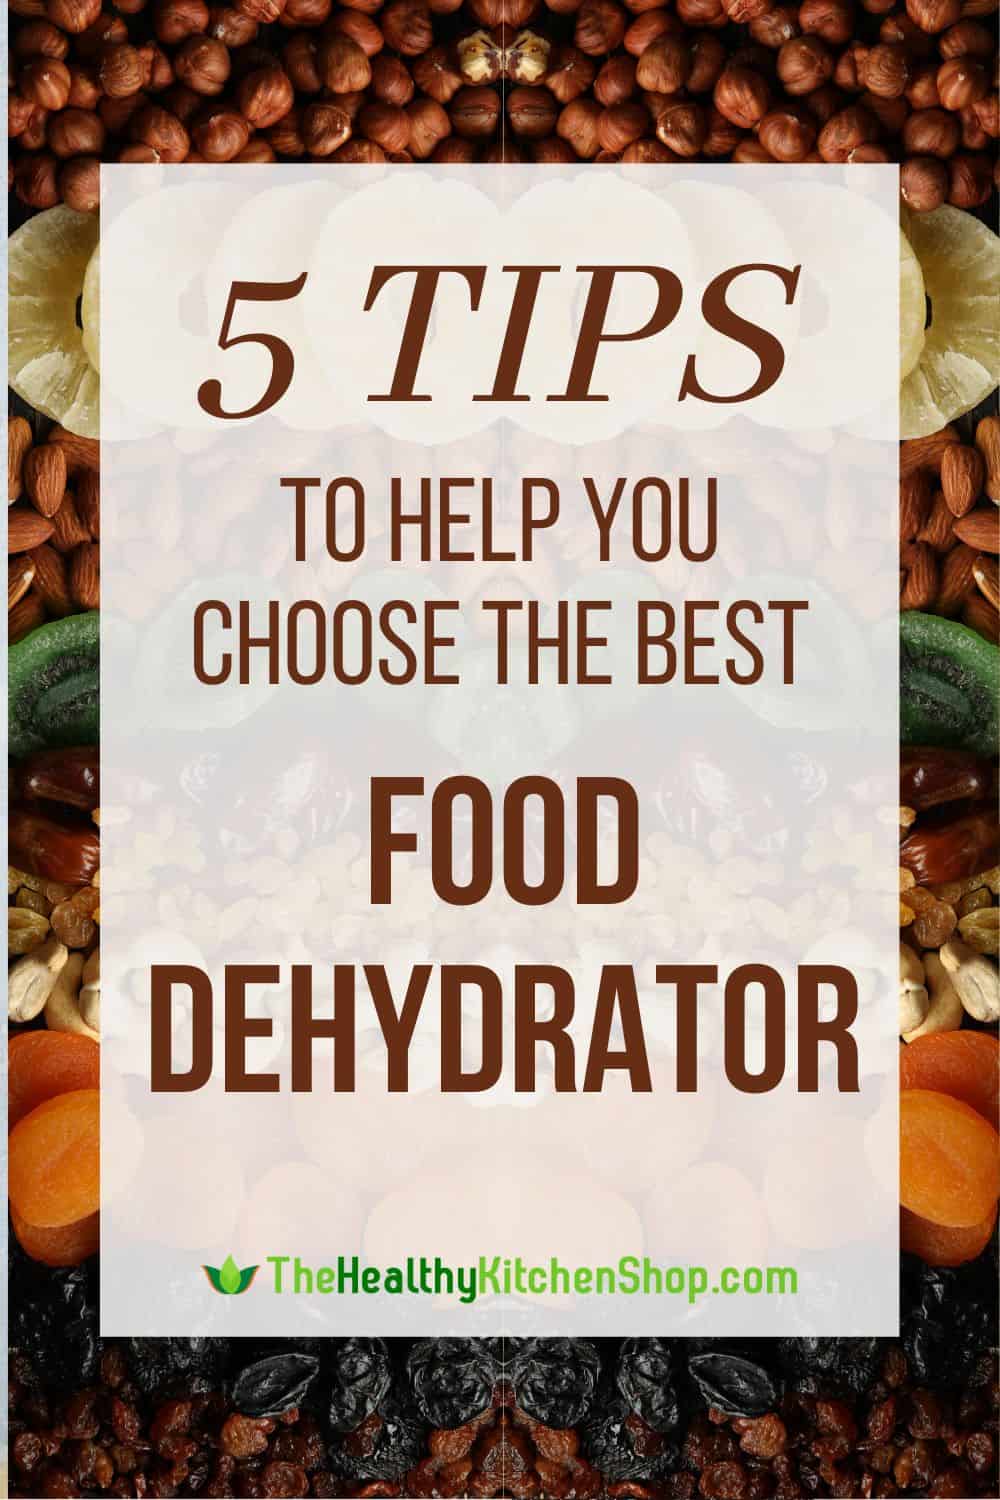 5 Tips to help you choose the best Food Dehydrator